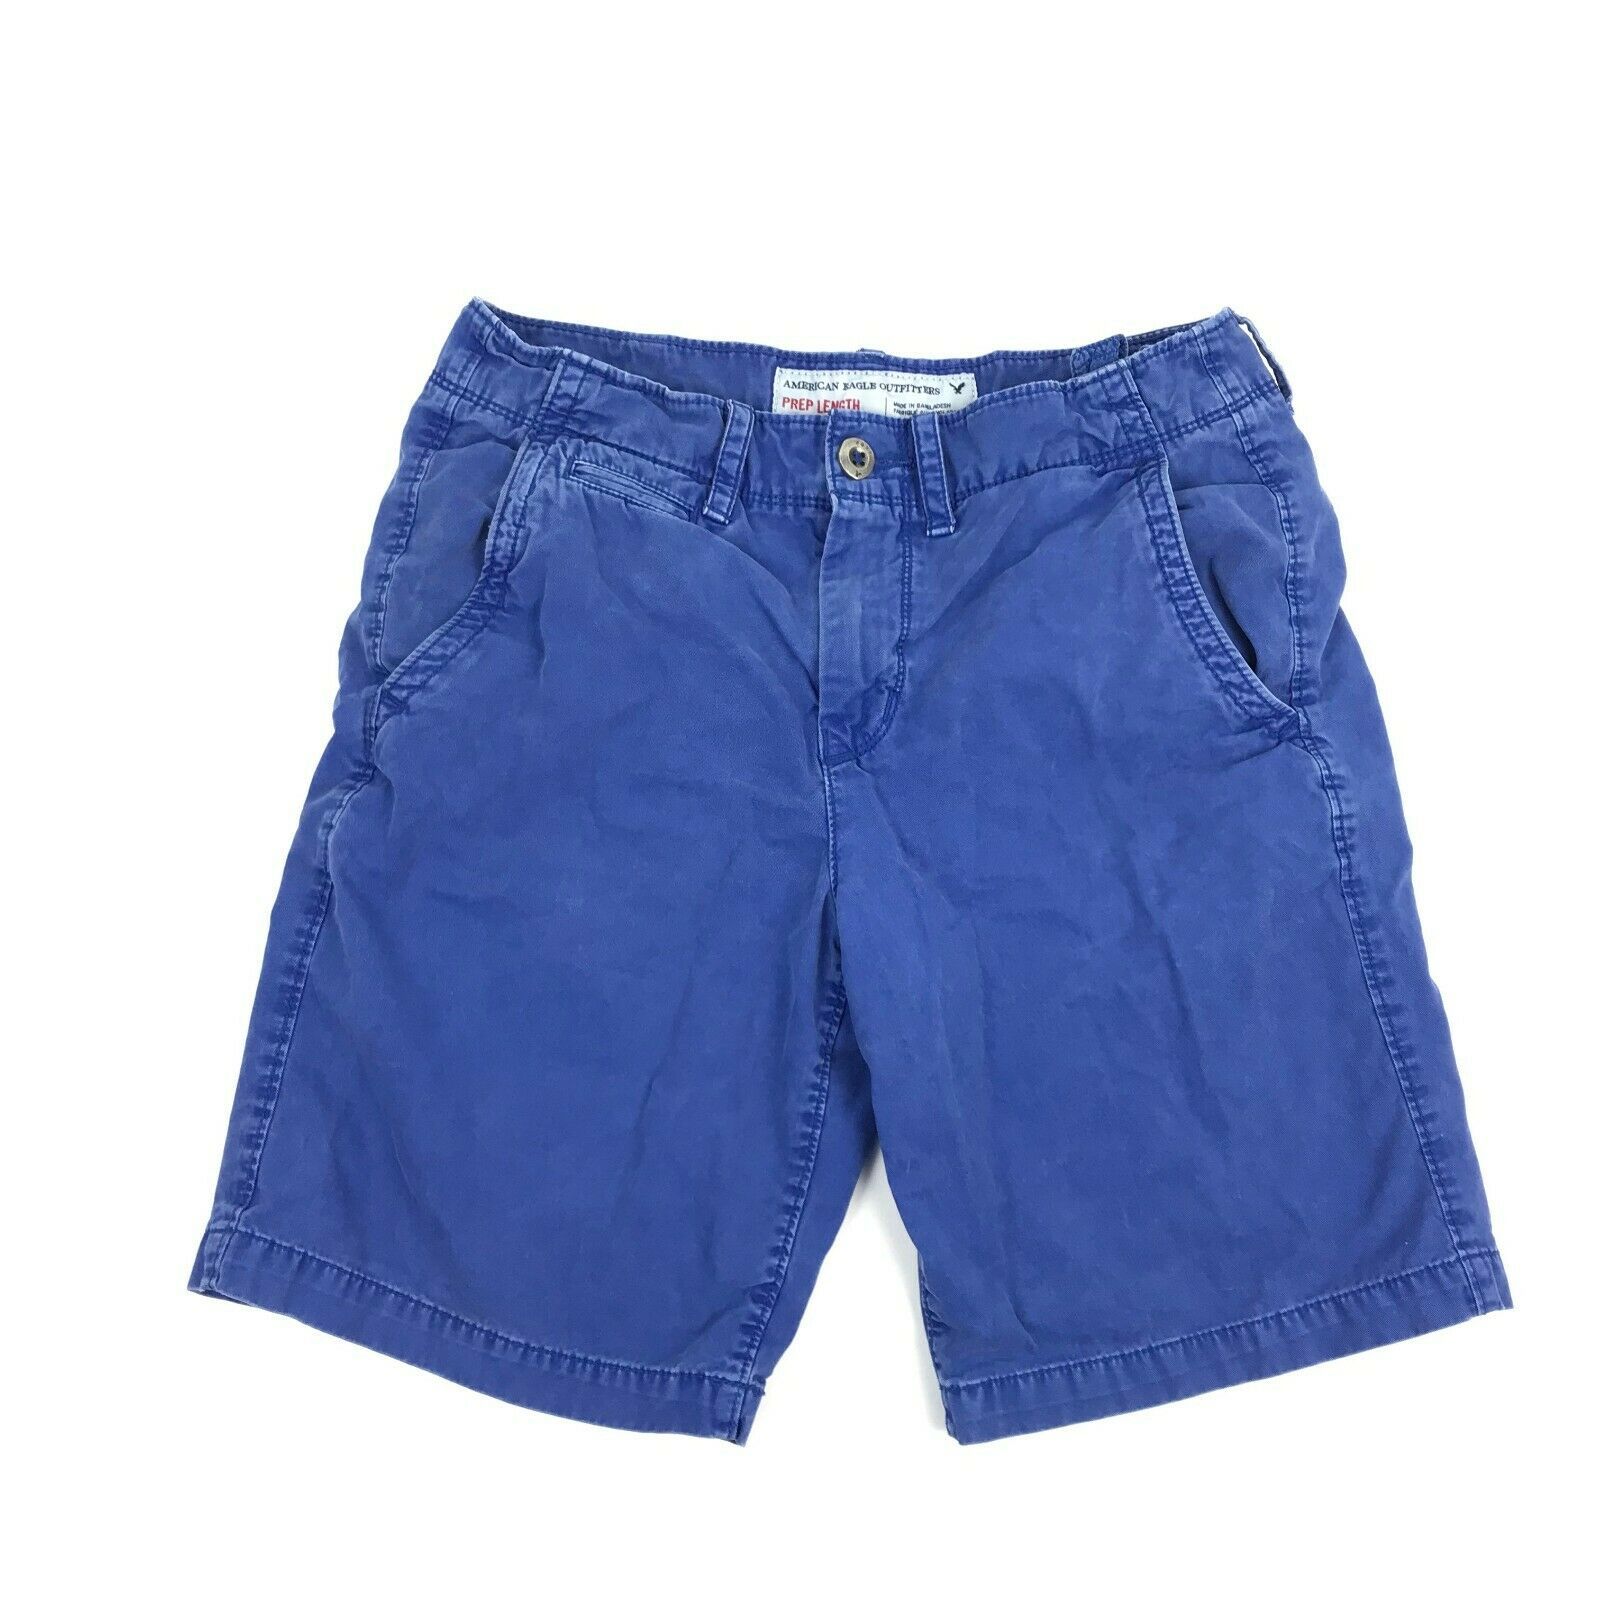 AMERICAN EAGLE Solid Blue Prep Flat Front Casual 19" Chino Shorts 100% Cotton 30 - $16.06